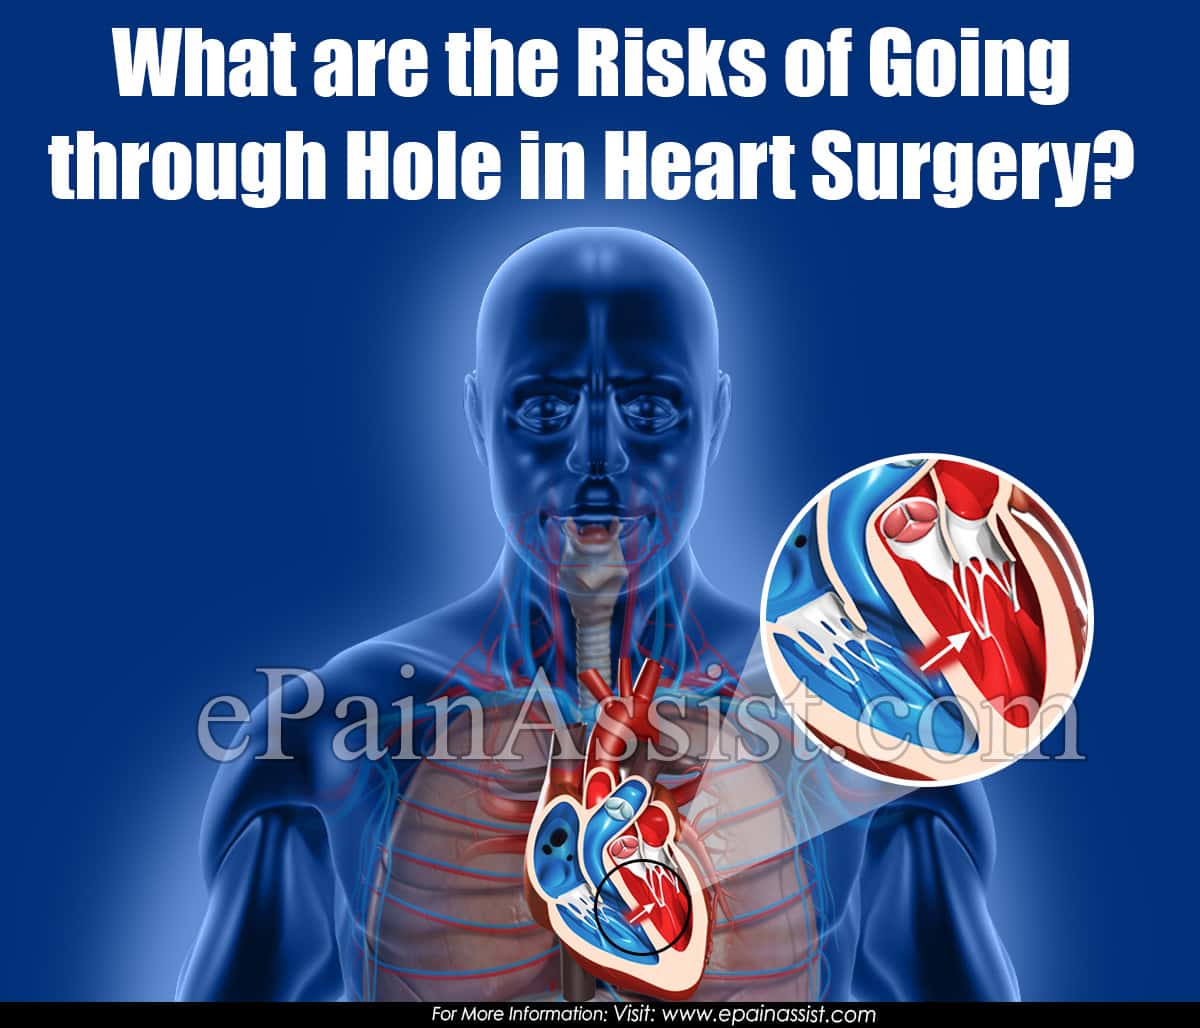 What are the Risks of Going through Hole in Heart Surgery?